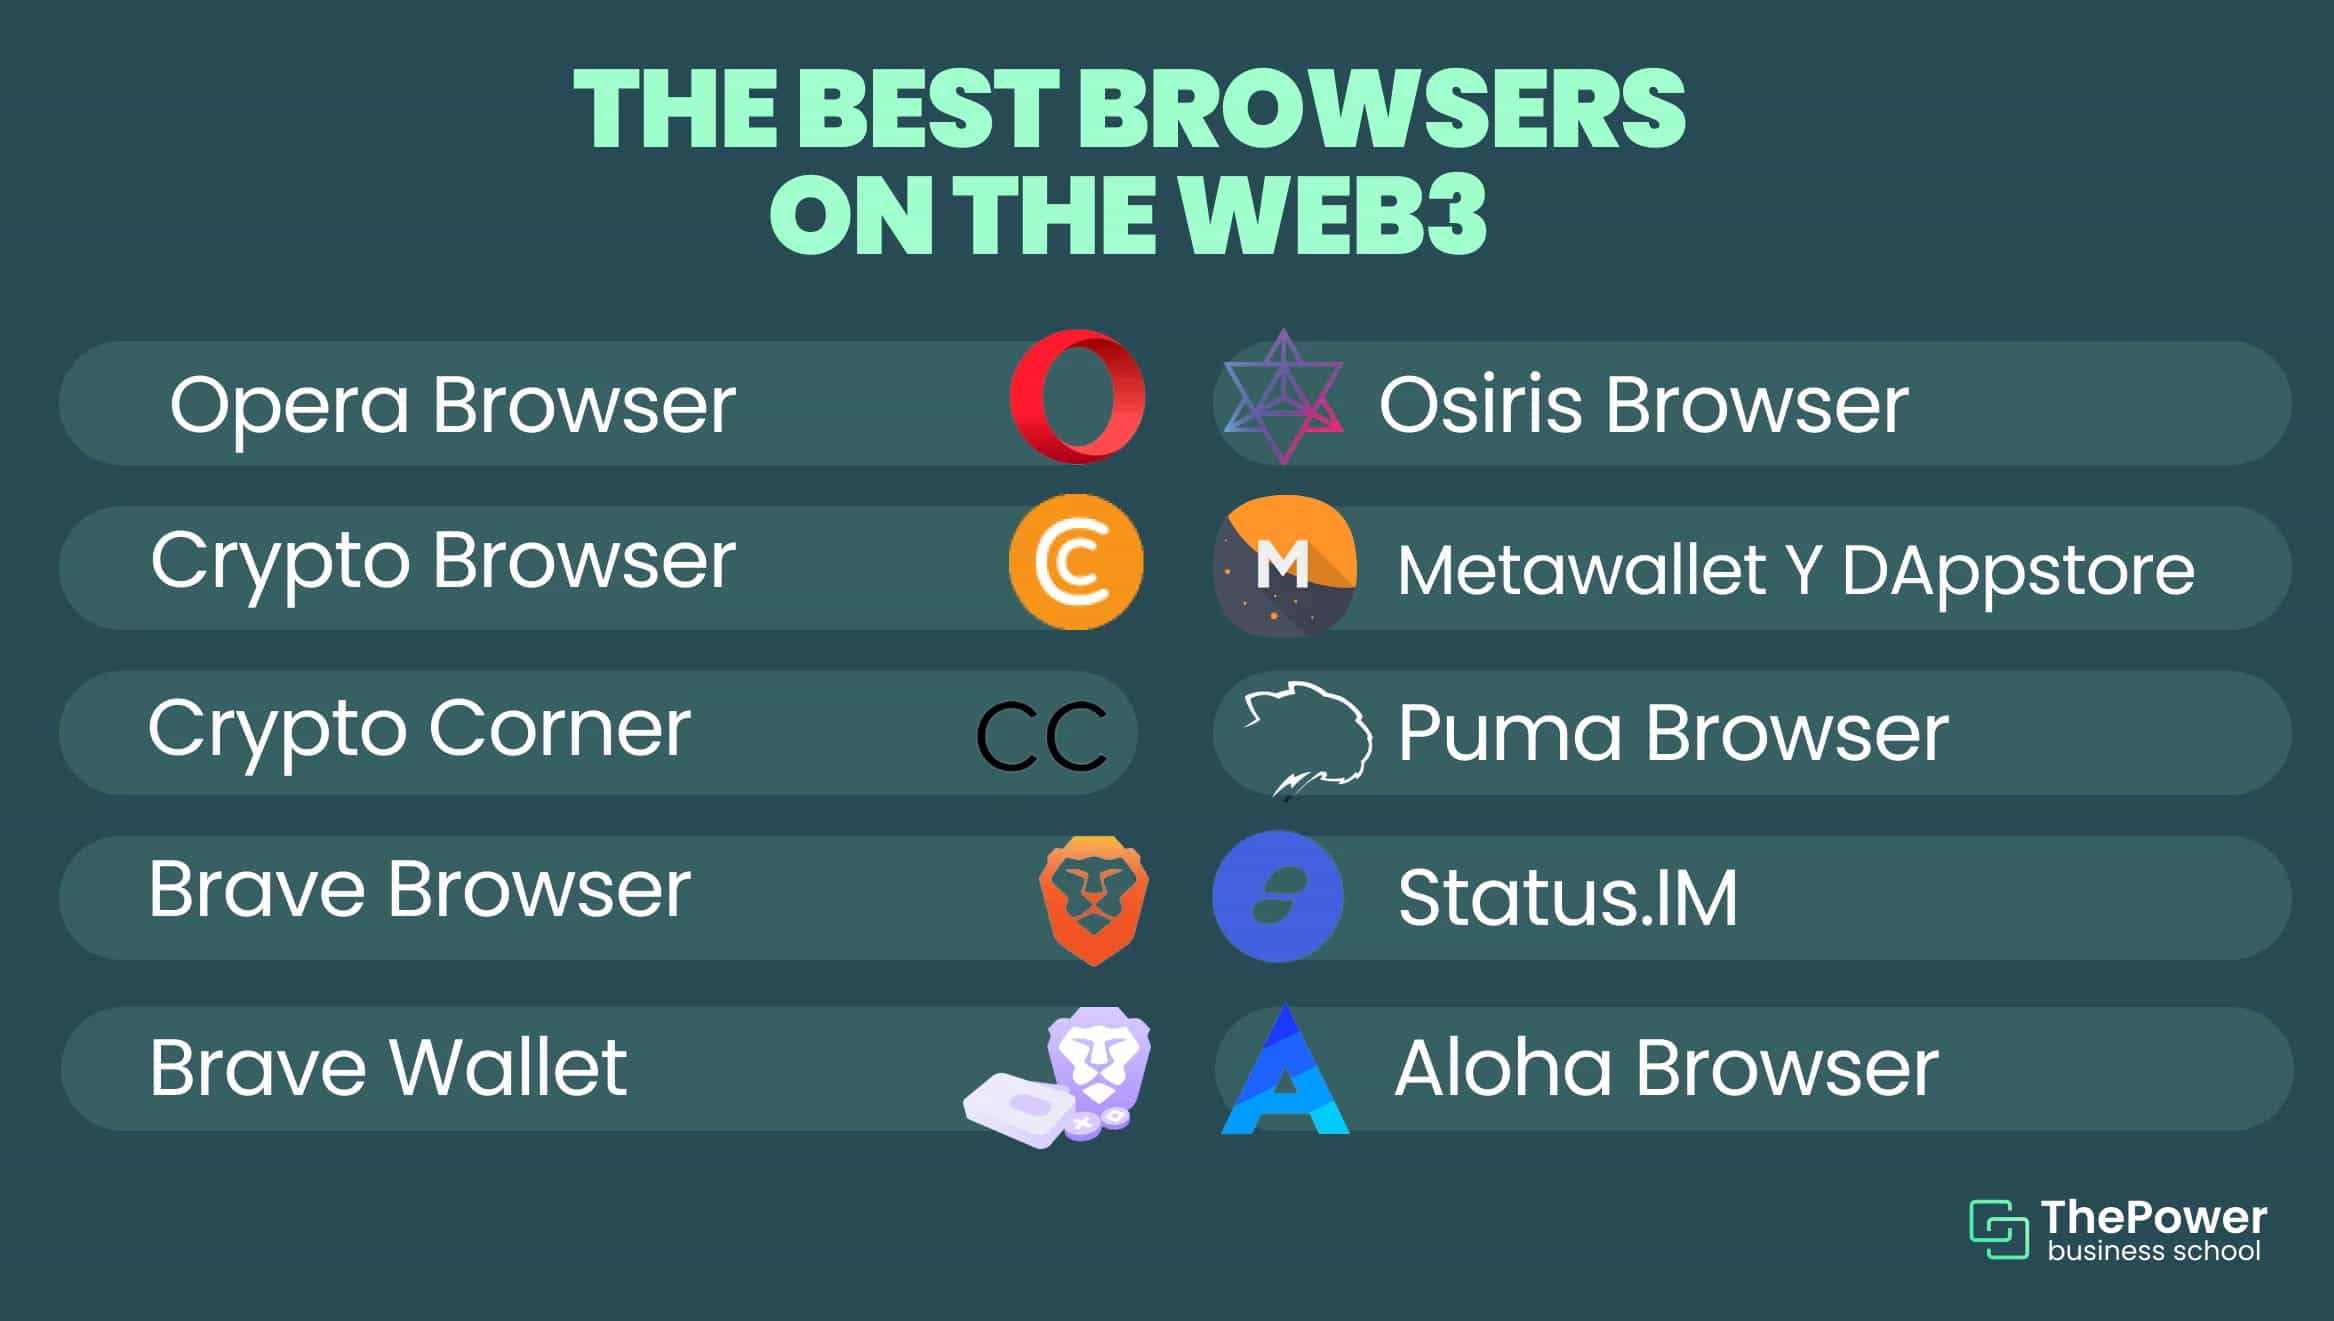 browsers on the Web3